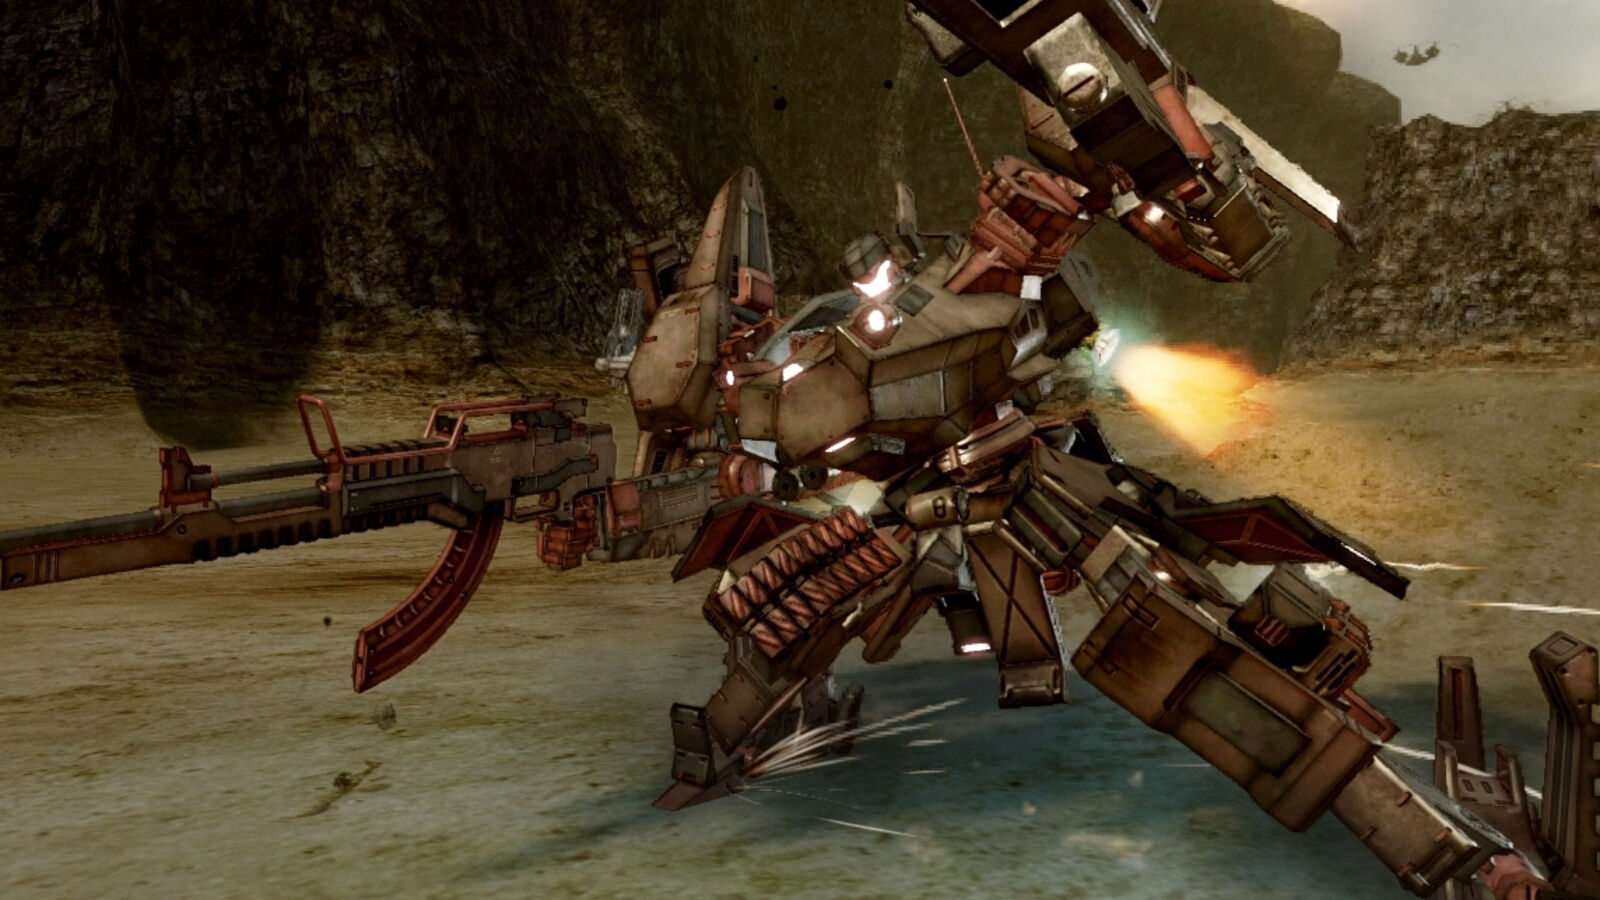 Details emerge about the next FromSoftware game after Armored Core